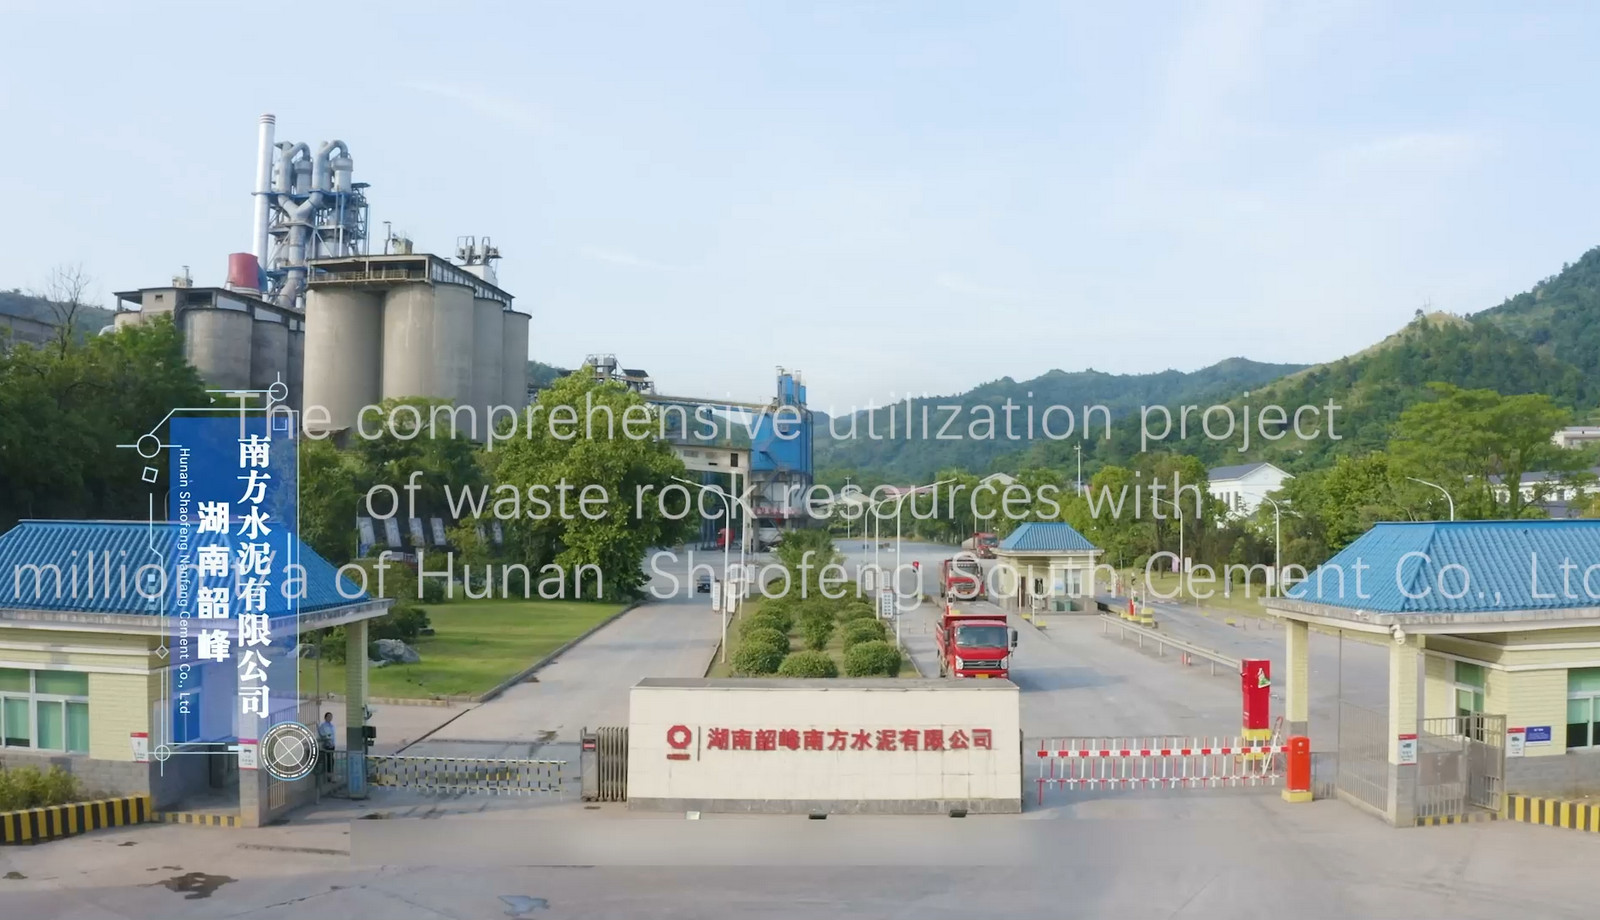 2 million t/a Project of Hunan Shaofeng South Cement